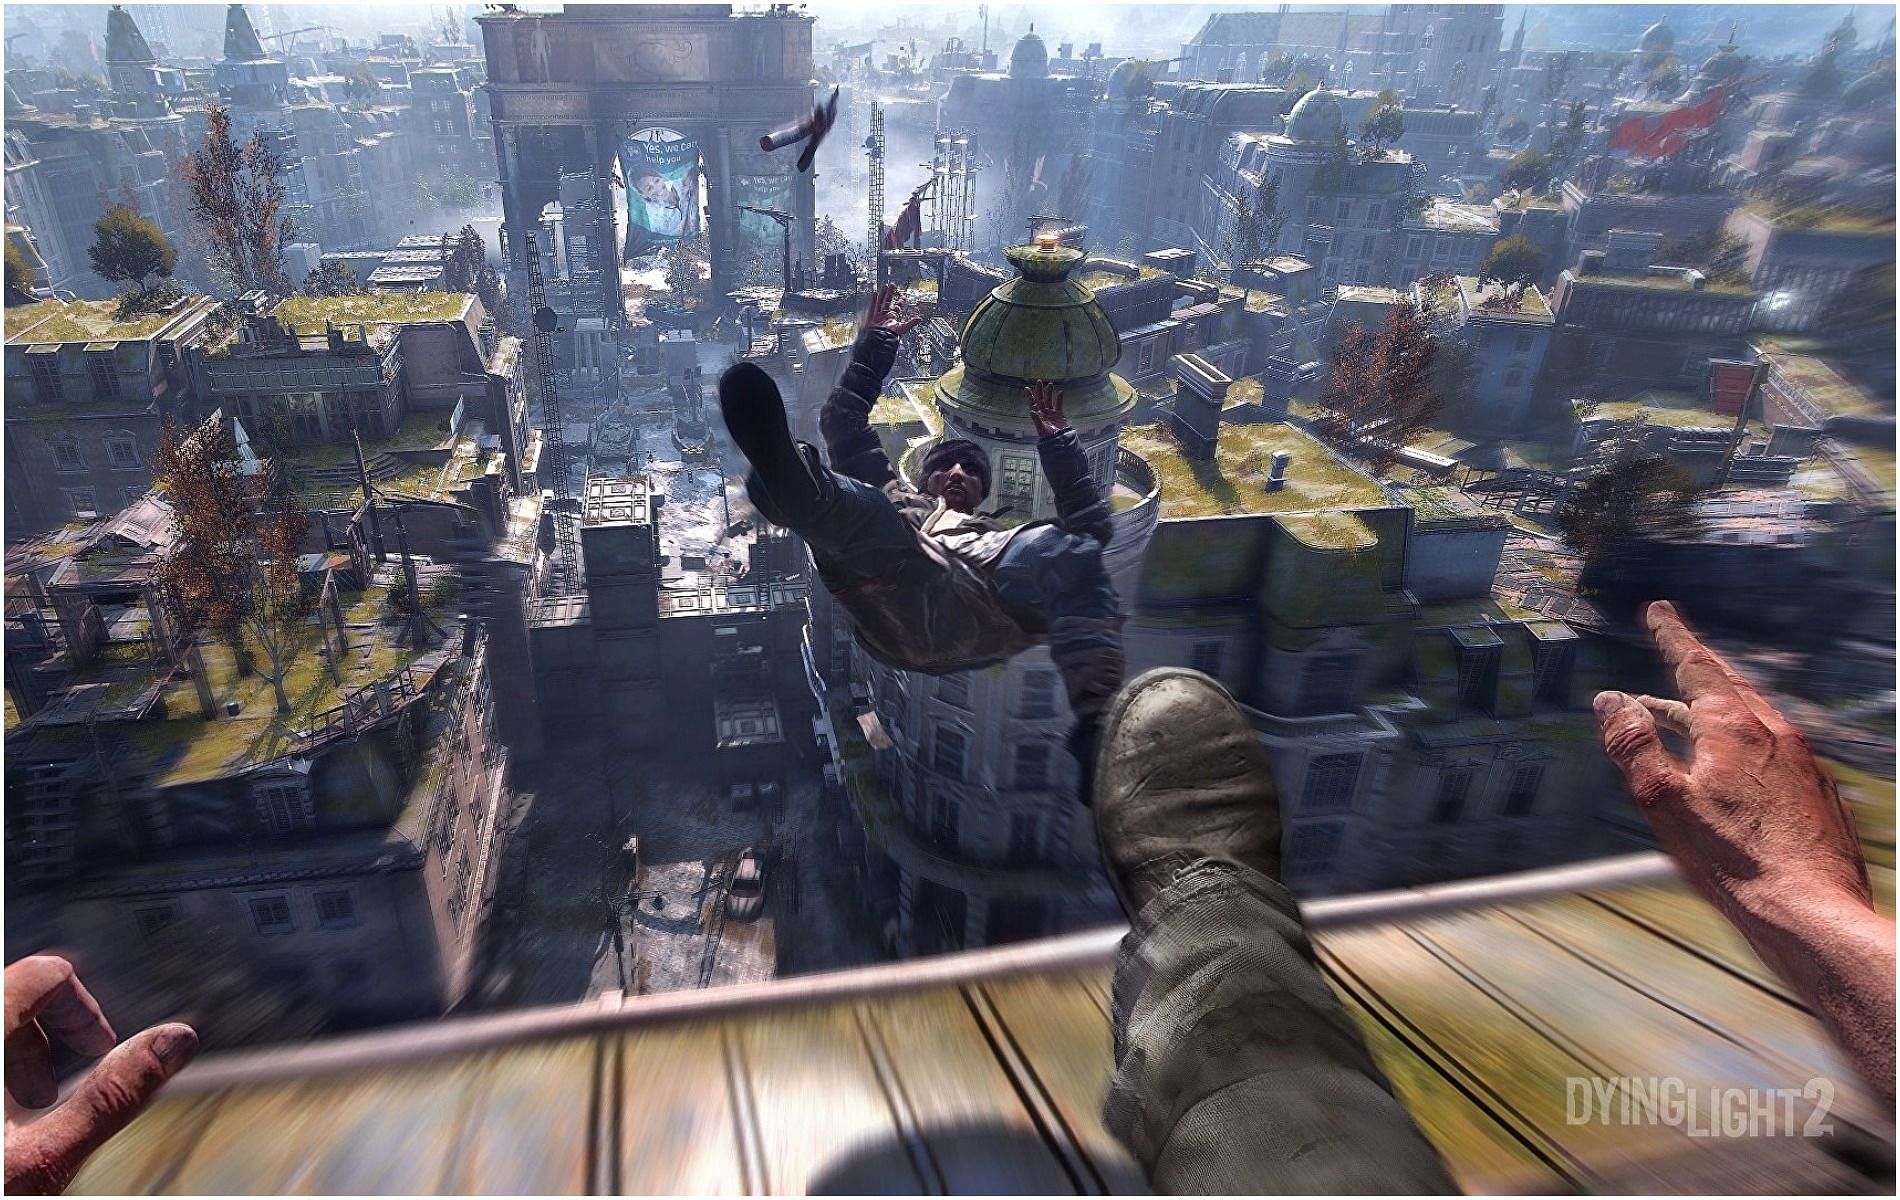 For the time being, things are looking positive for Dying Light 2 (Image via Techland)